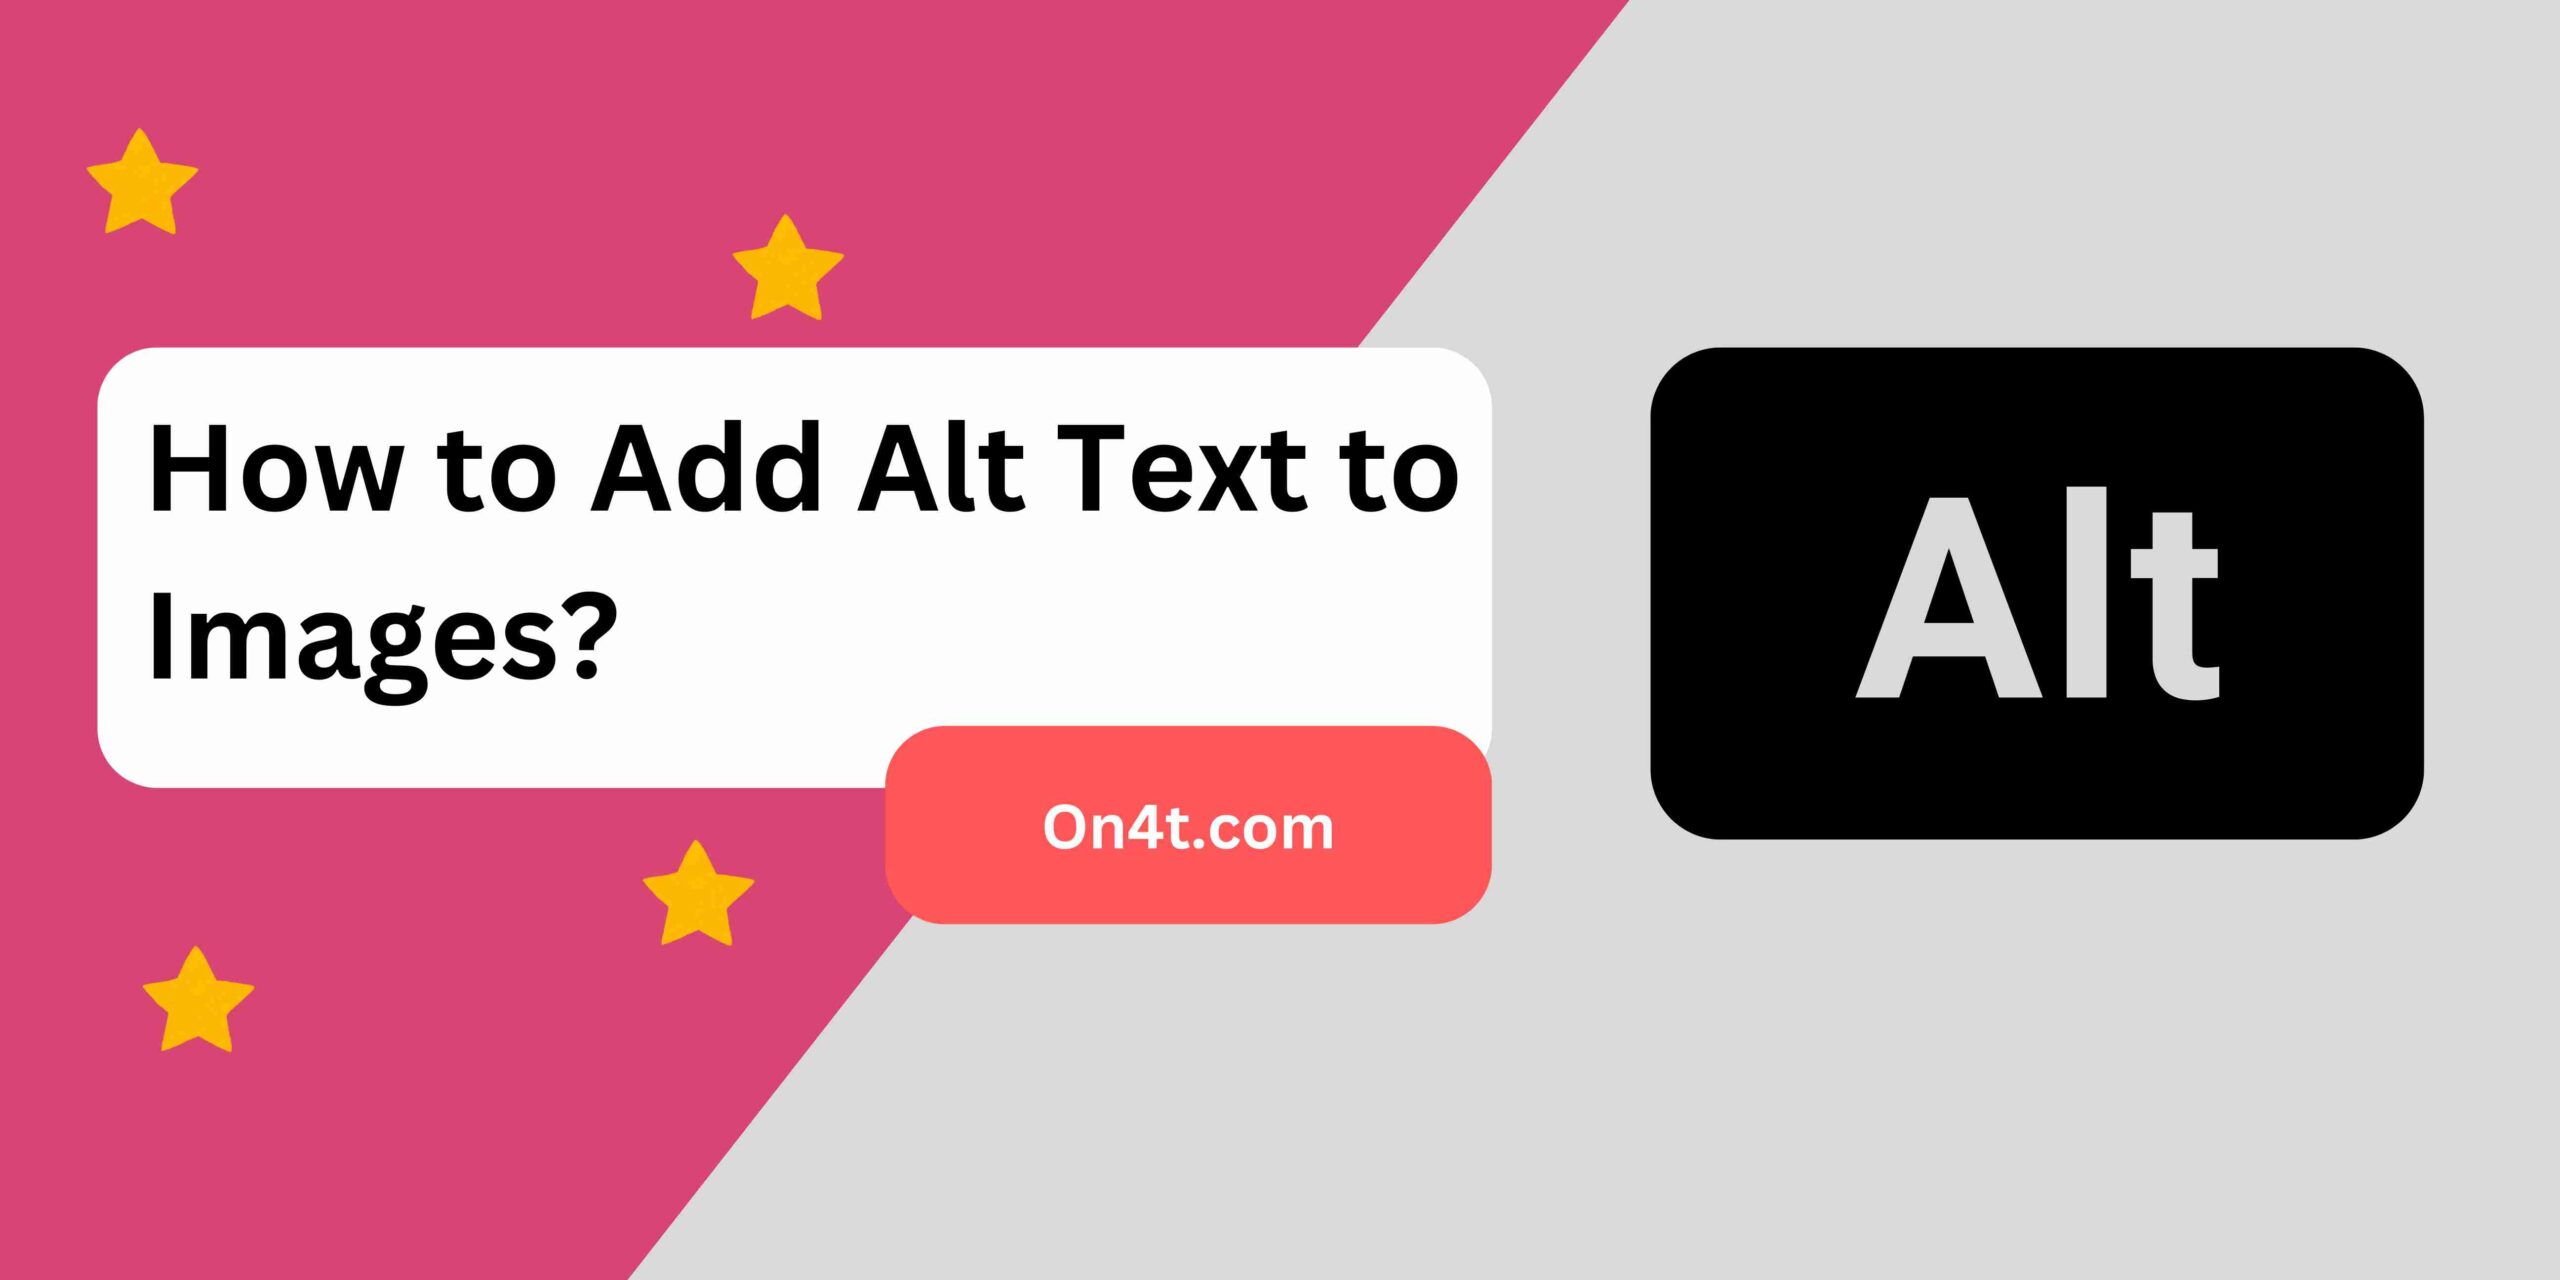 How to Add Alt Text to Images